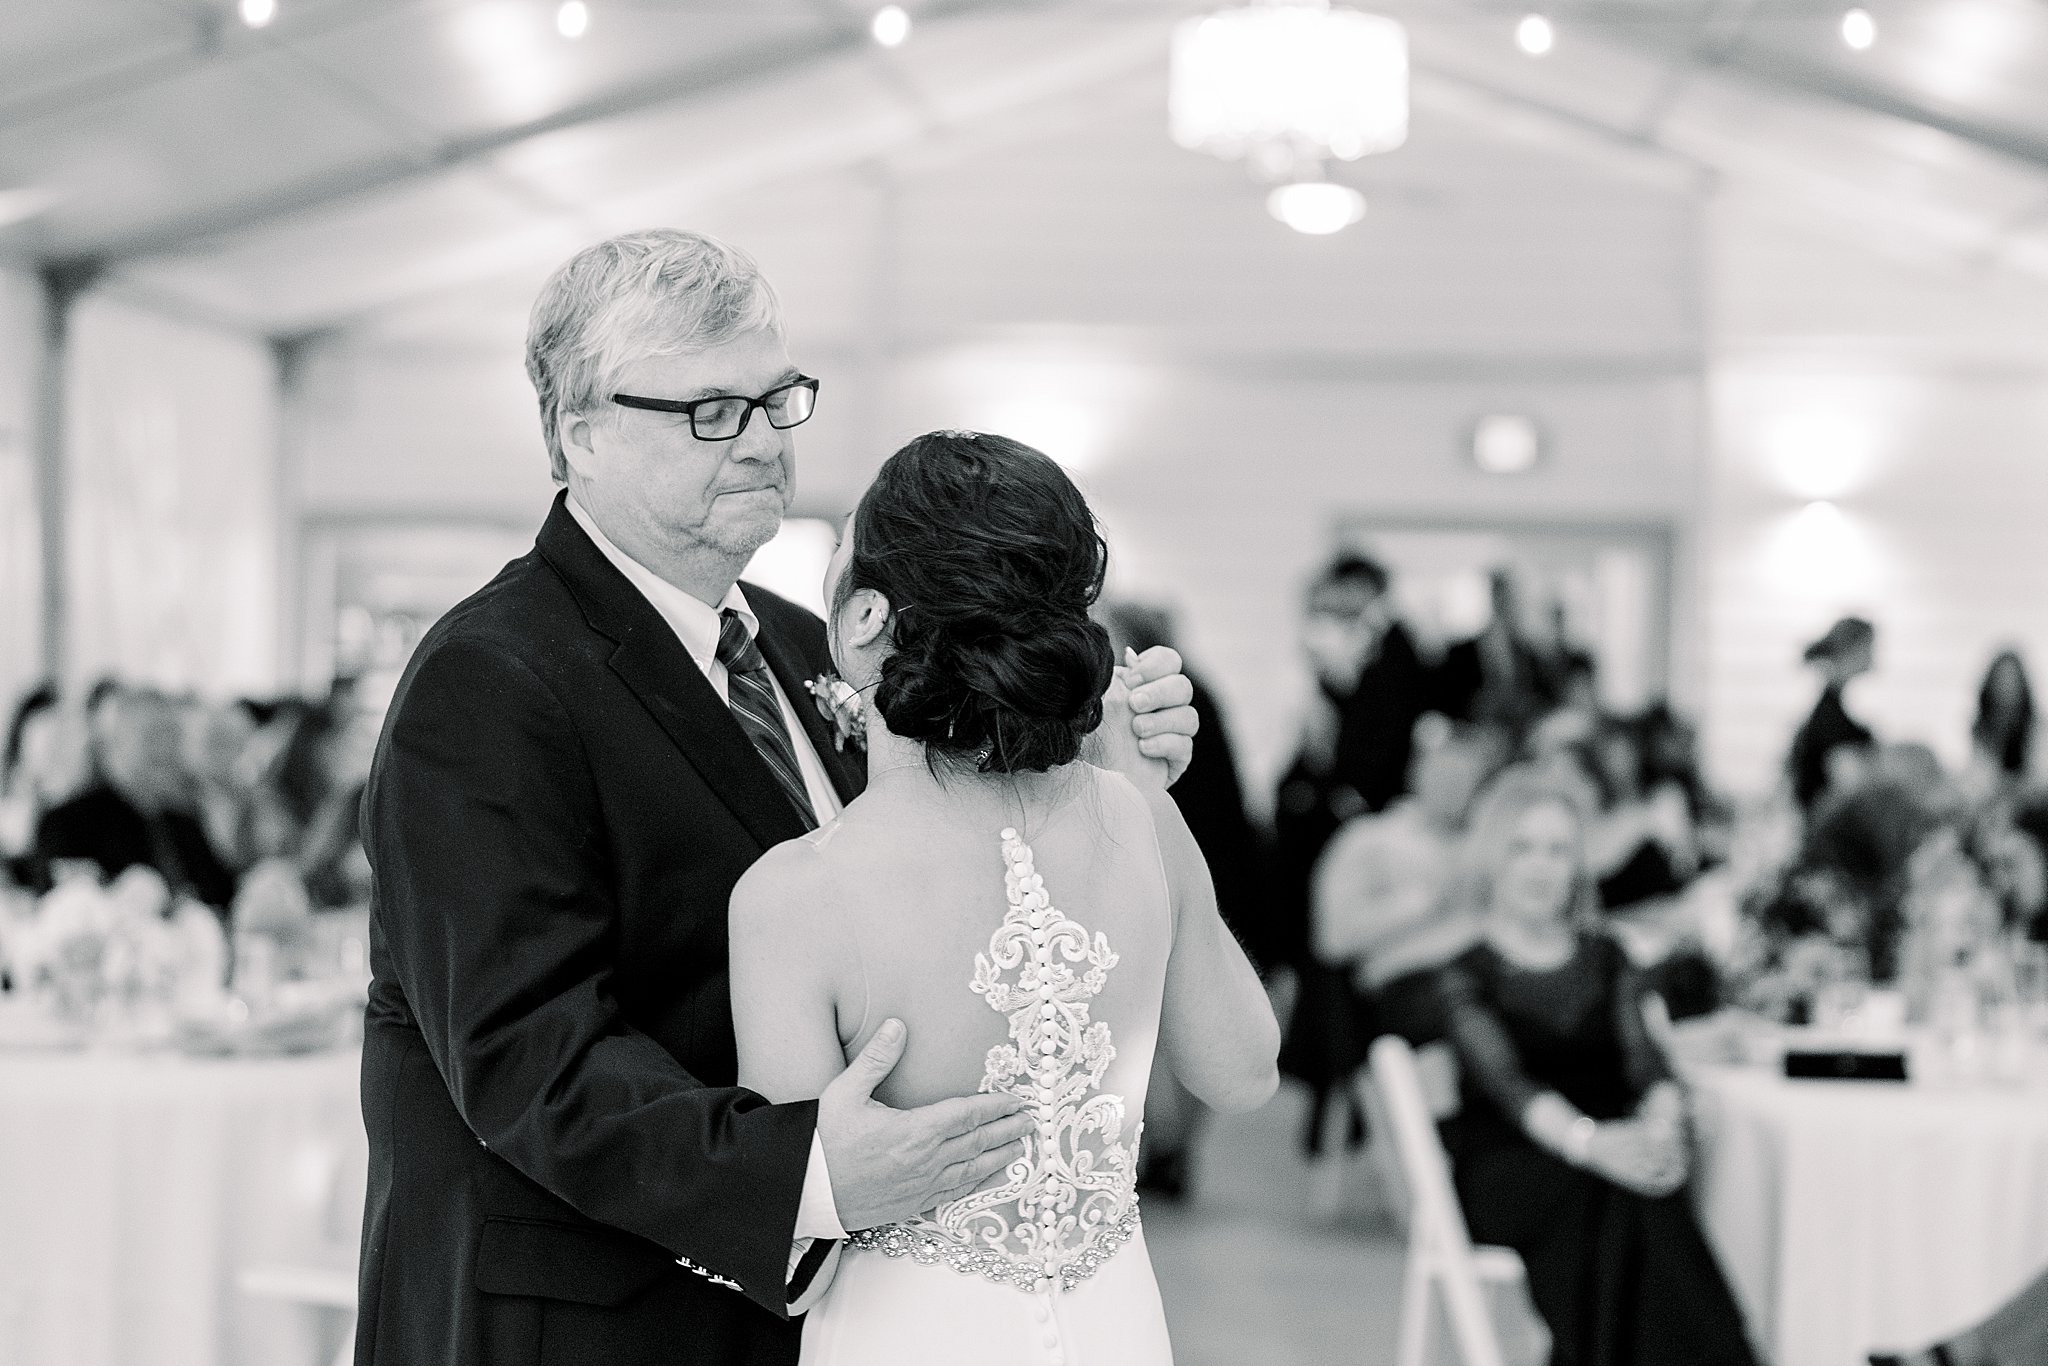 Bride and her father dancing during elegant Grand Rapids wedding day reception.